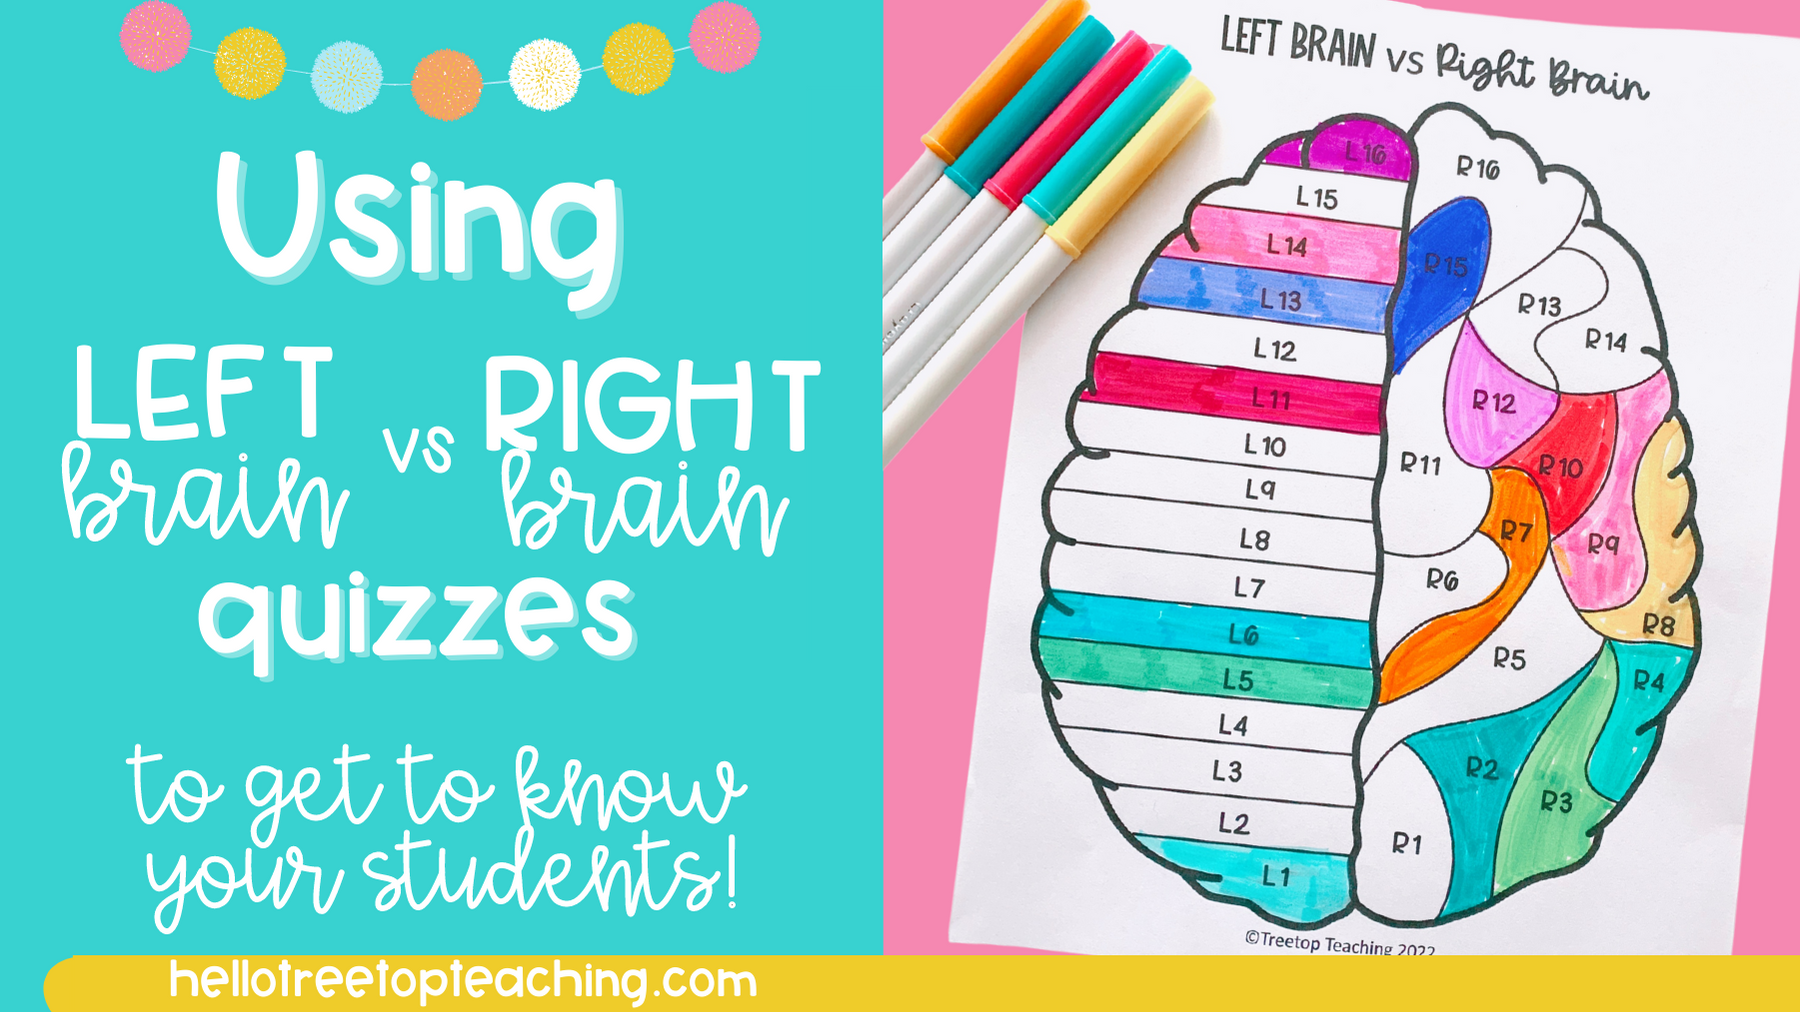 Using left brain vs right brain test in the classroom to get to know your students